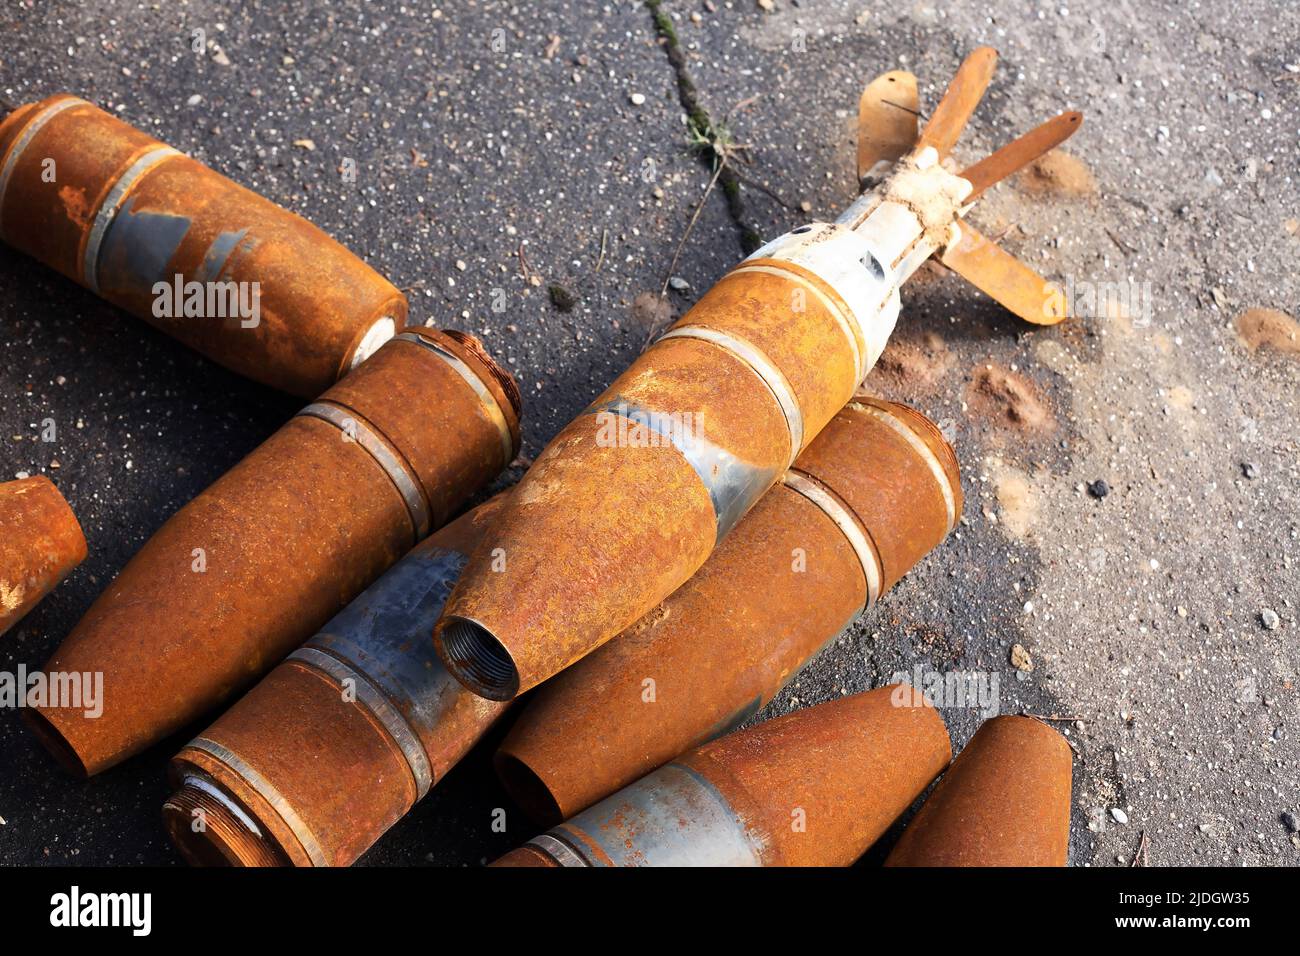 Waste of war. Few rusty used missiles on gray asphalt background Stock Photo